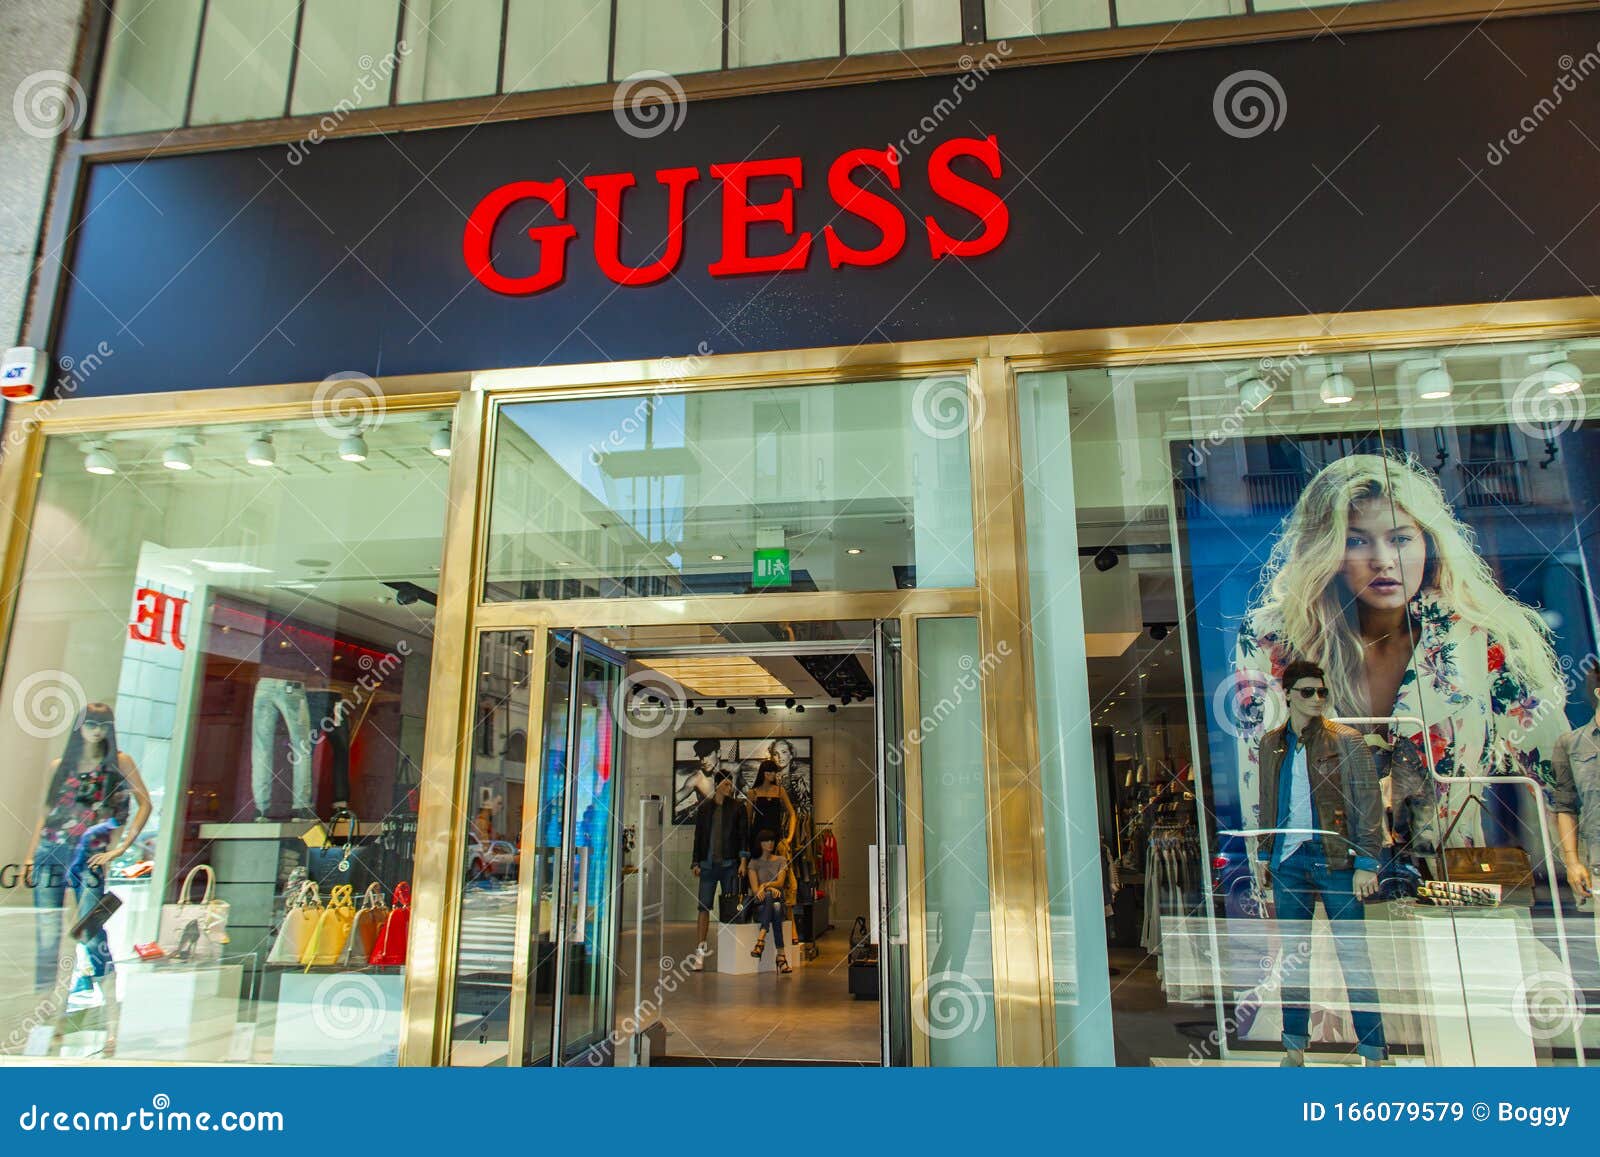 Guess editorial stock image. Image of europe, company